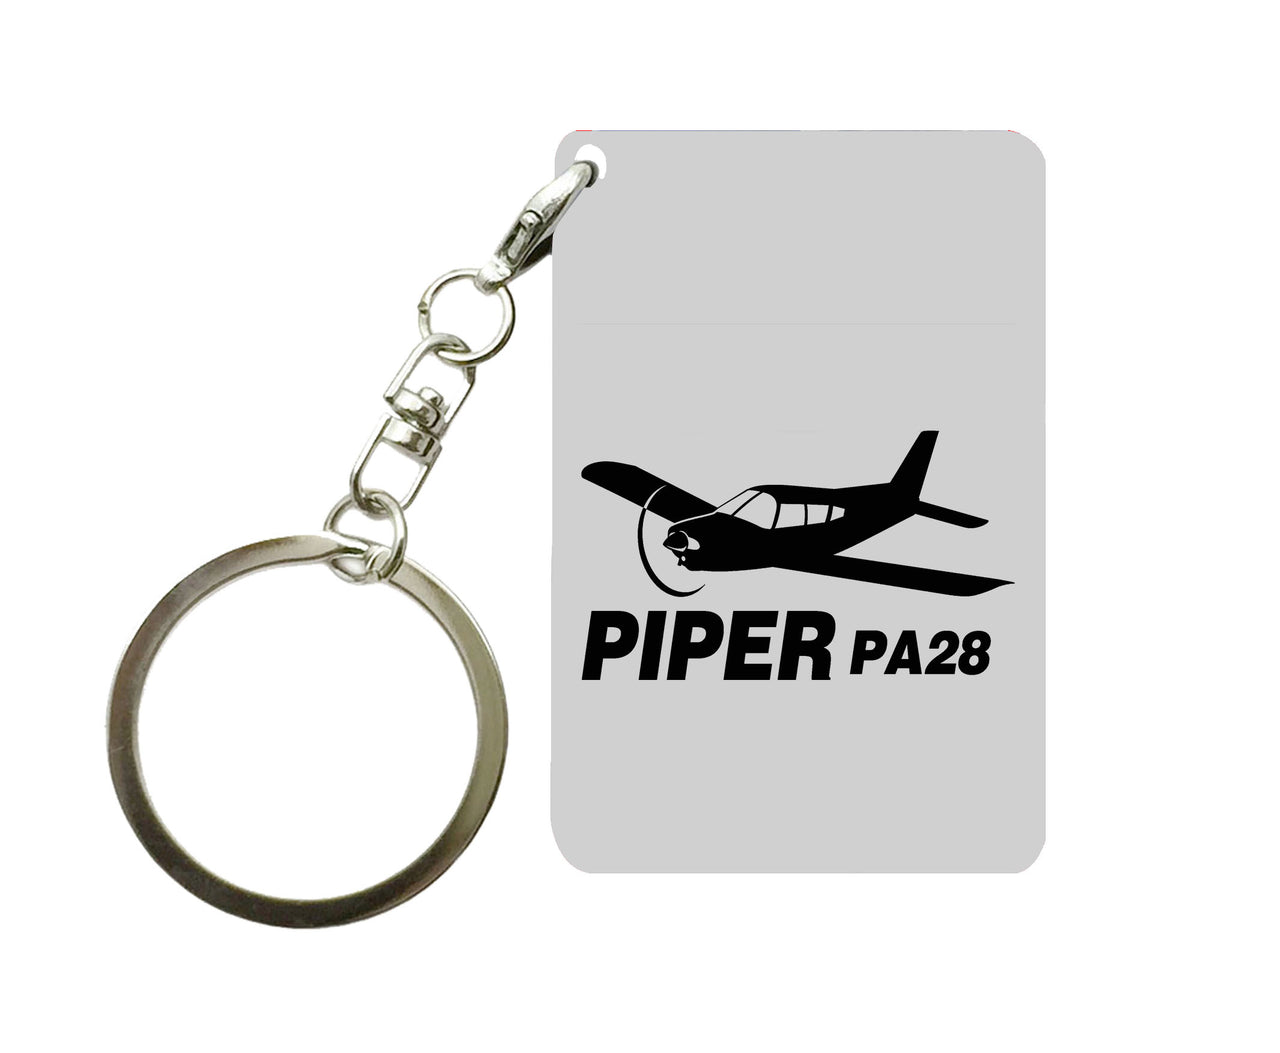 The Piper PA28 Designed Key Chains